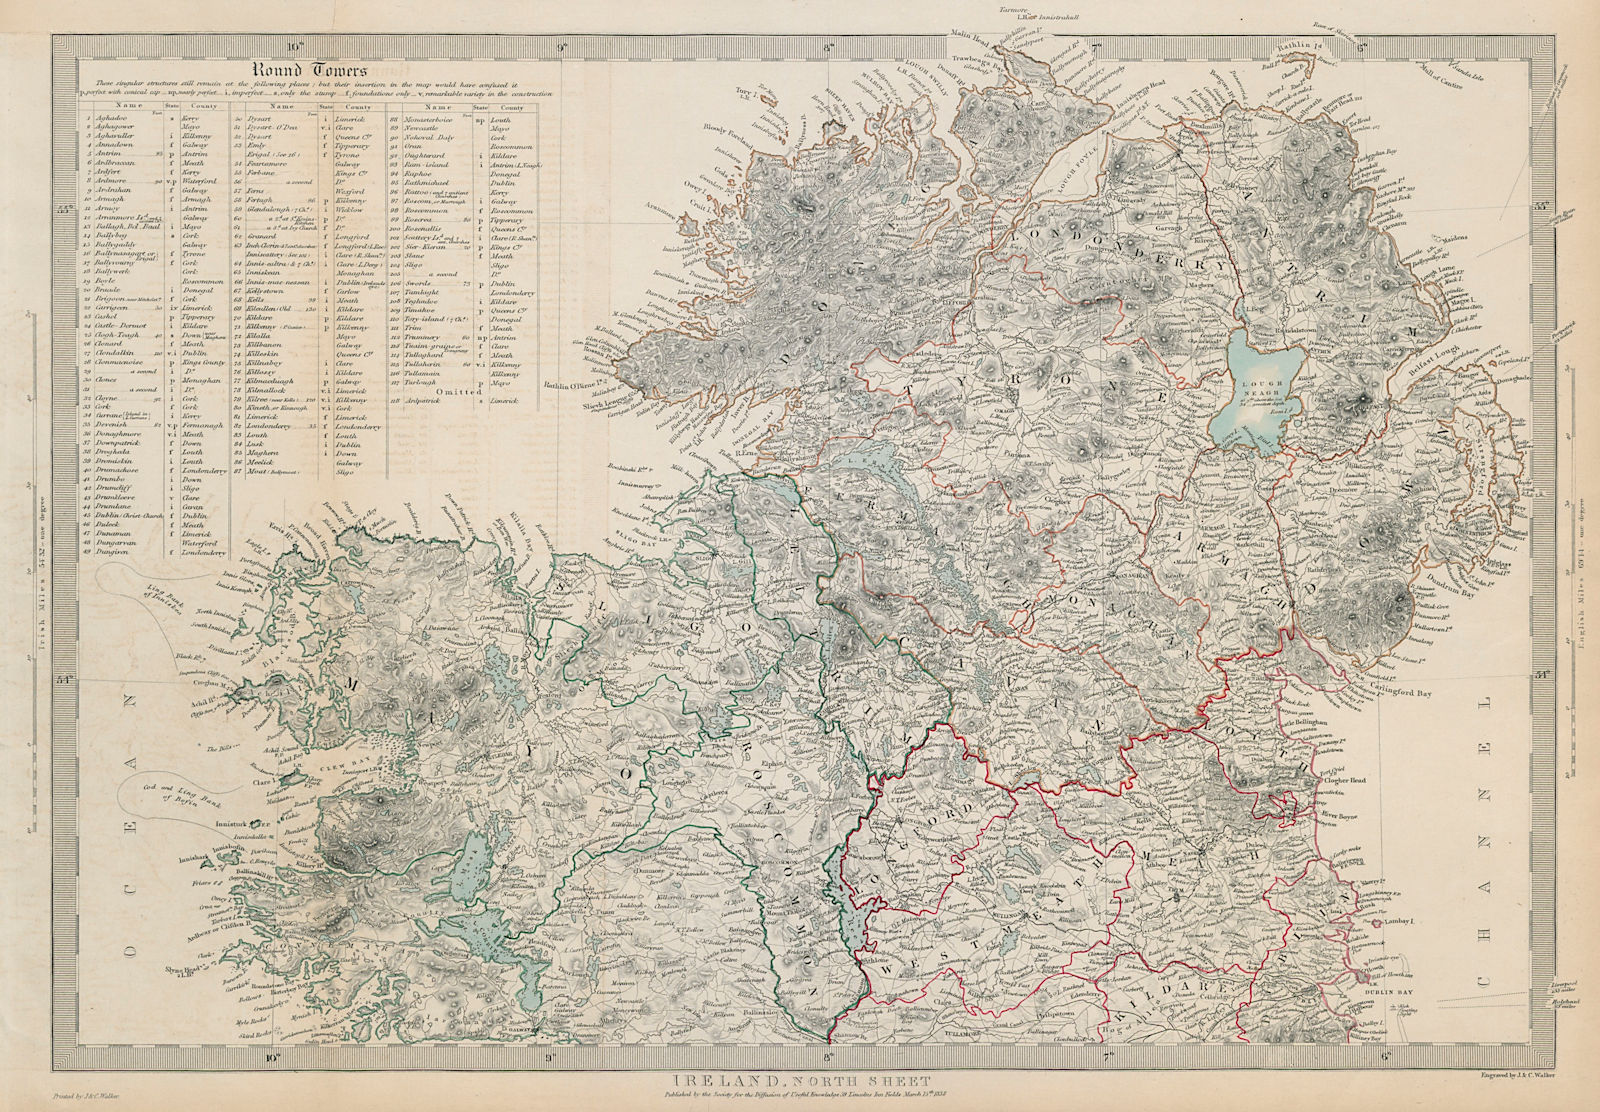 IRELAND North Sheet. Cloigtheach Cloigthithe. List of round towers SDUK 1844 map